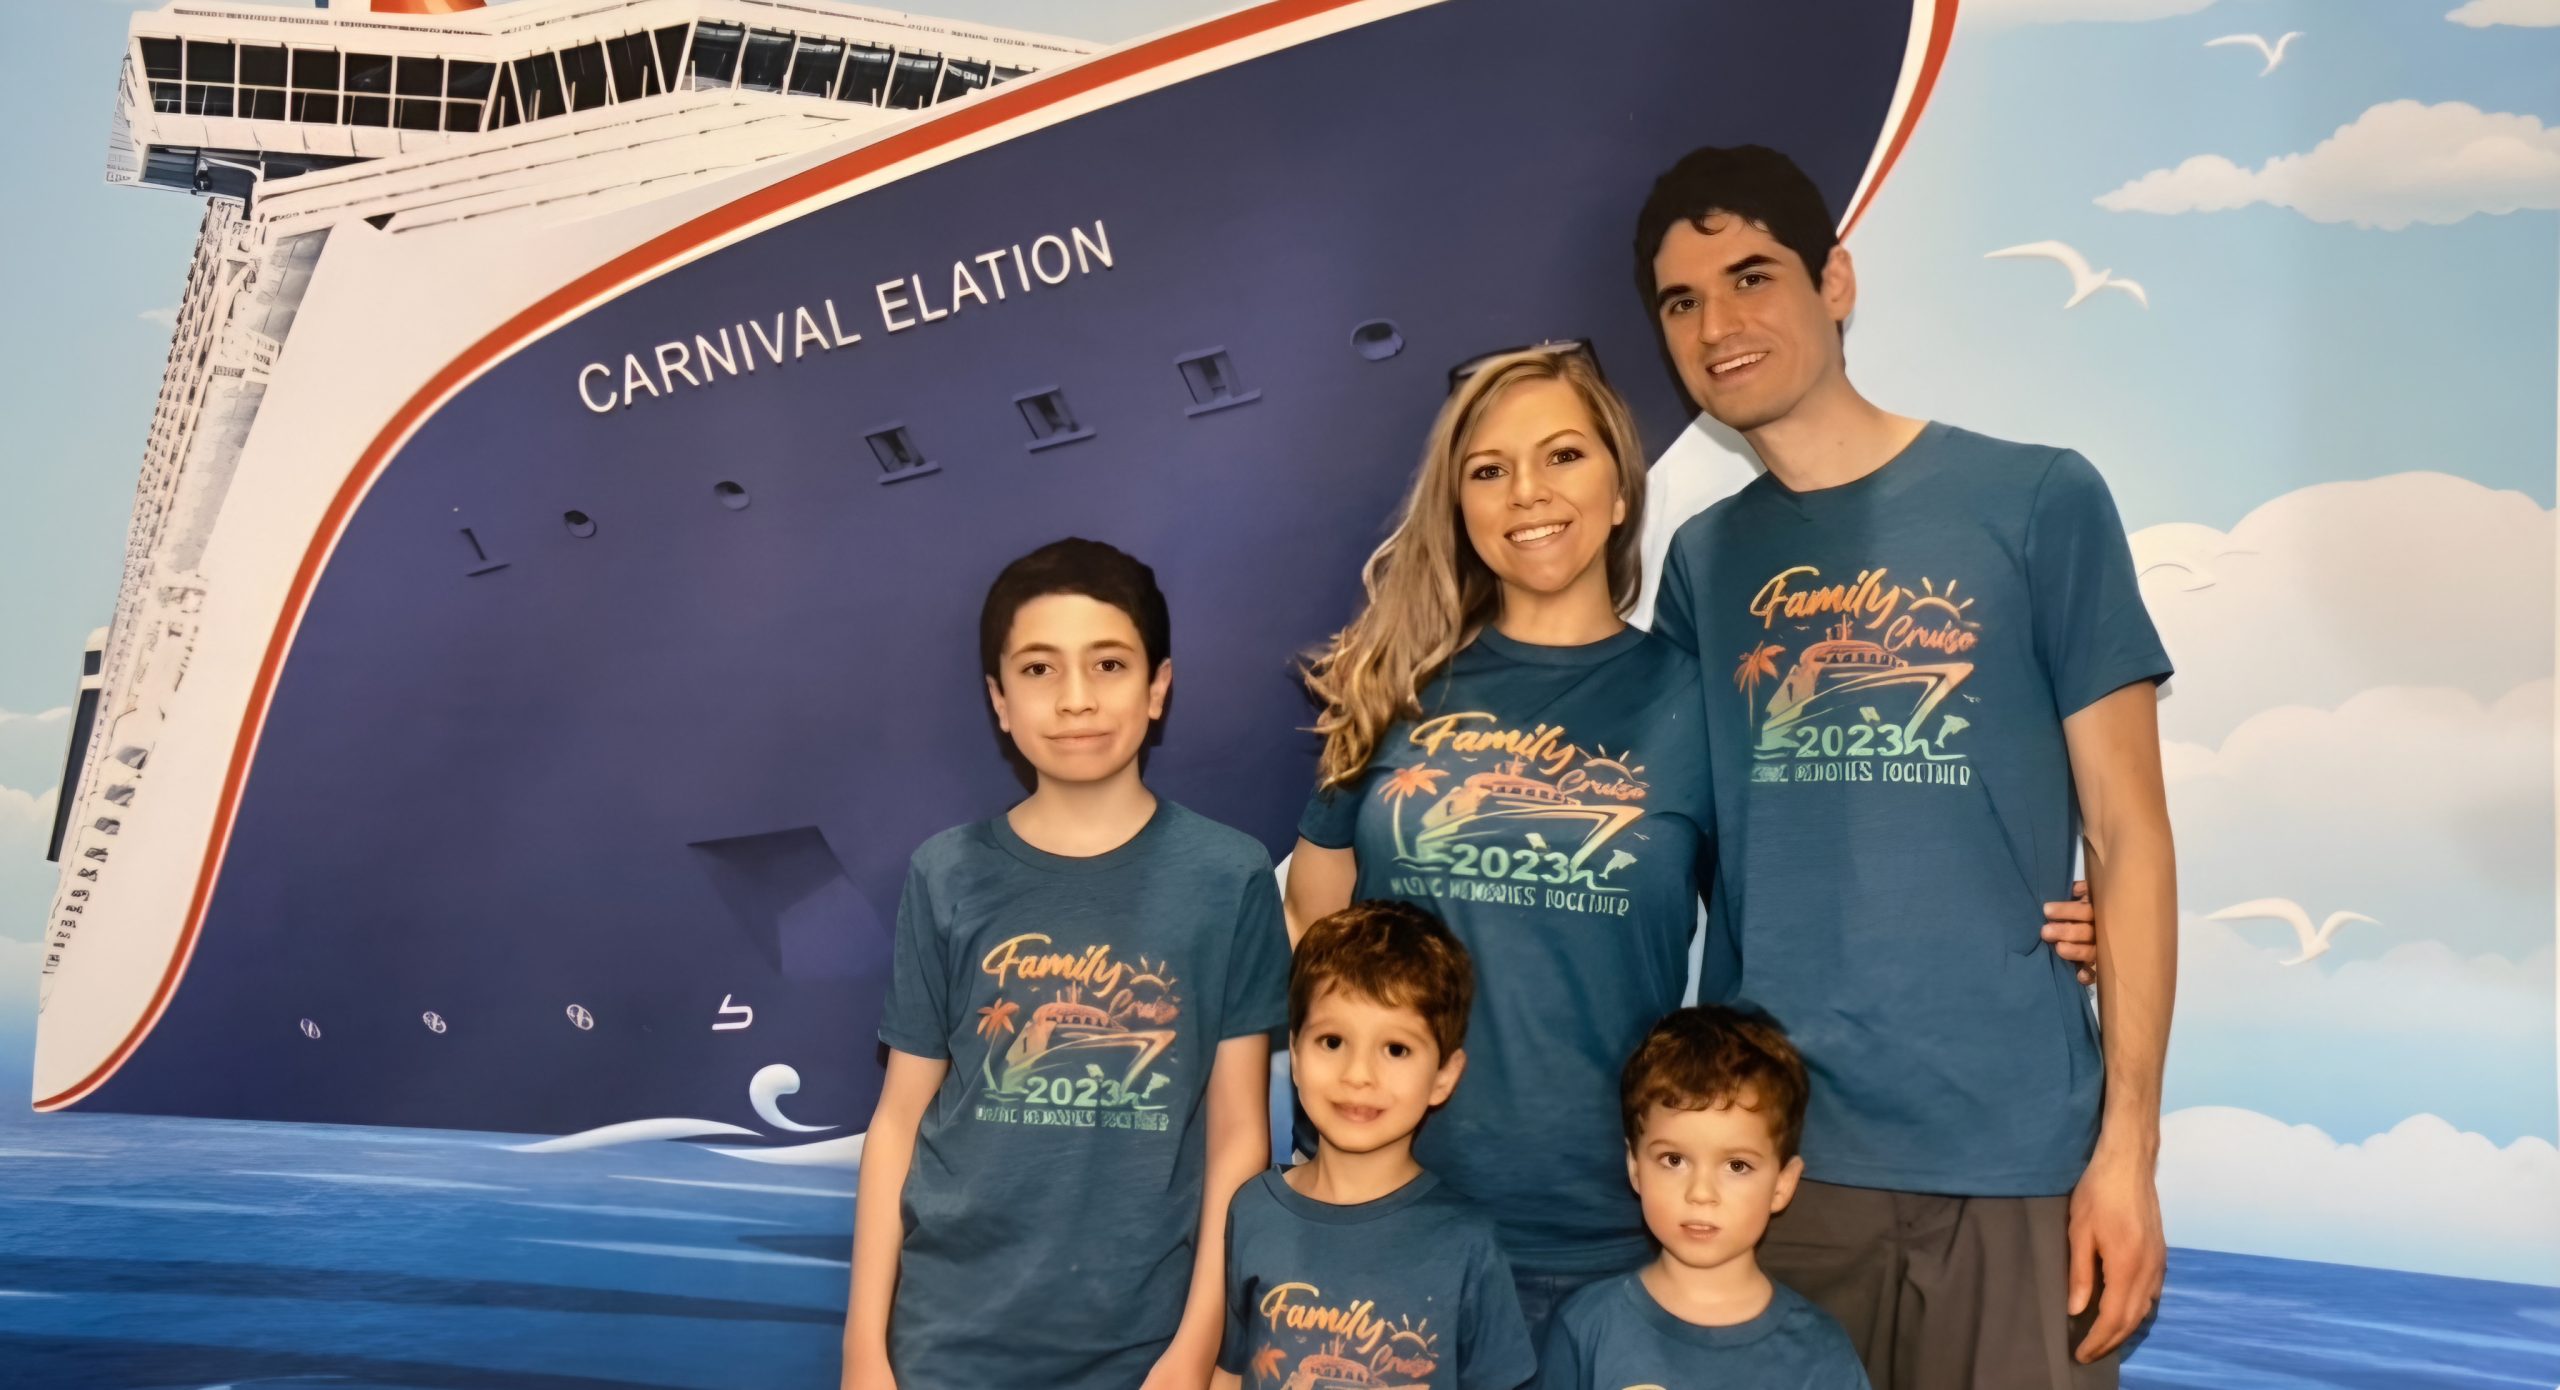 Setting Sail As A Family Of Five